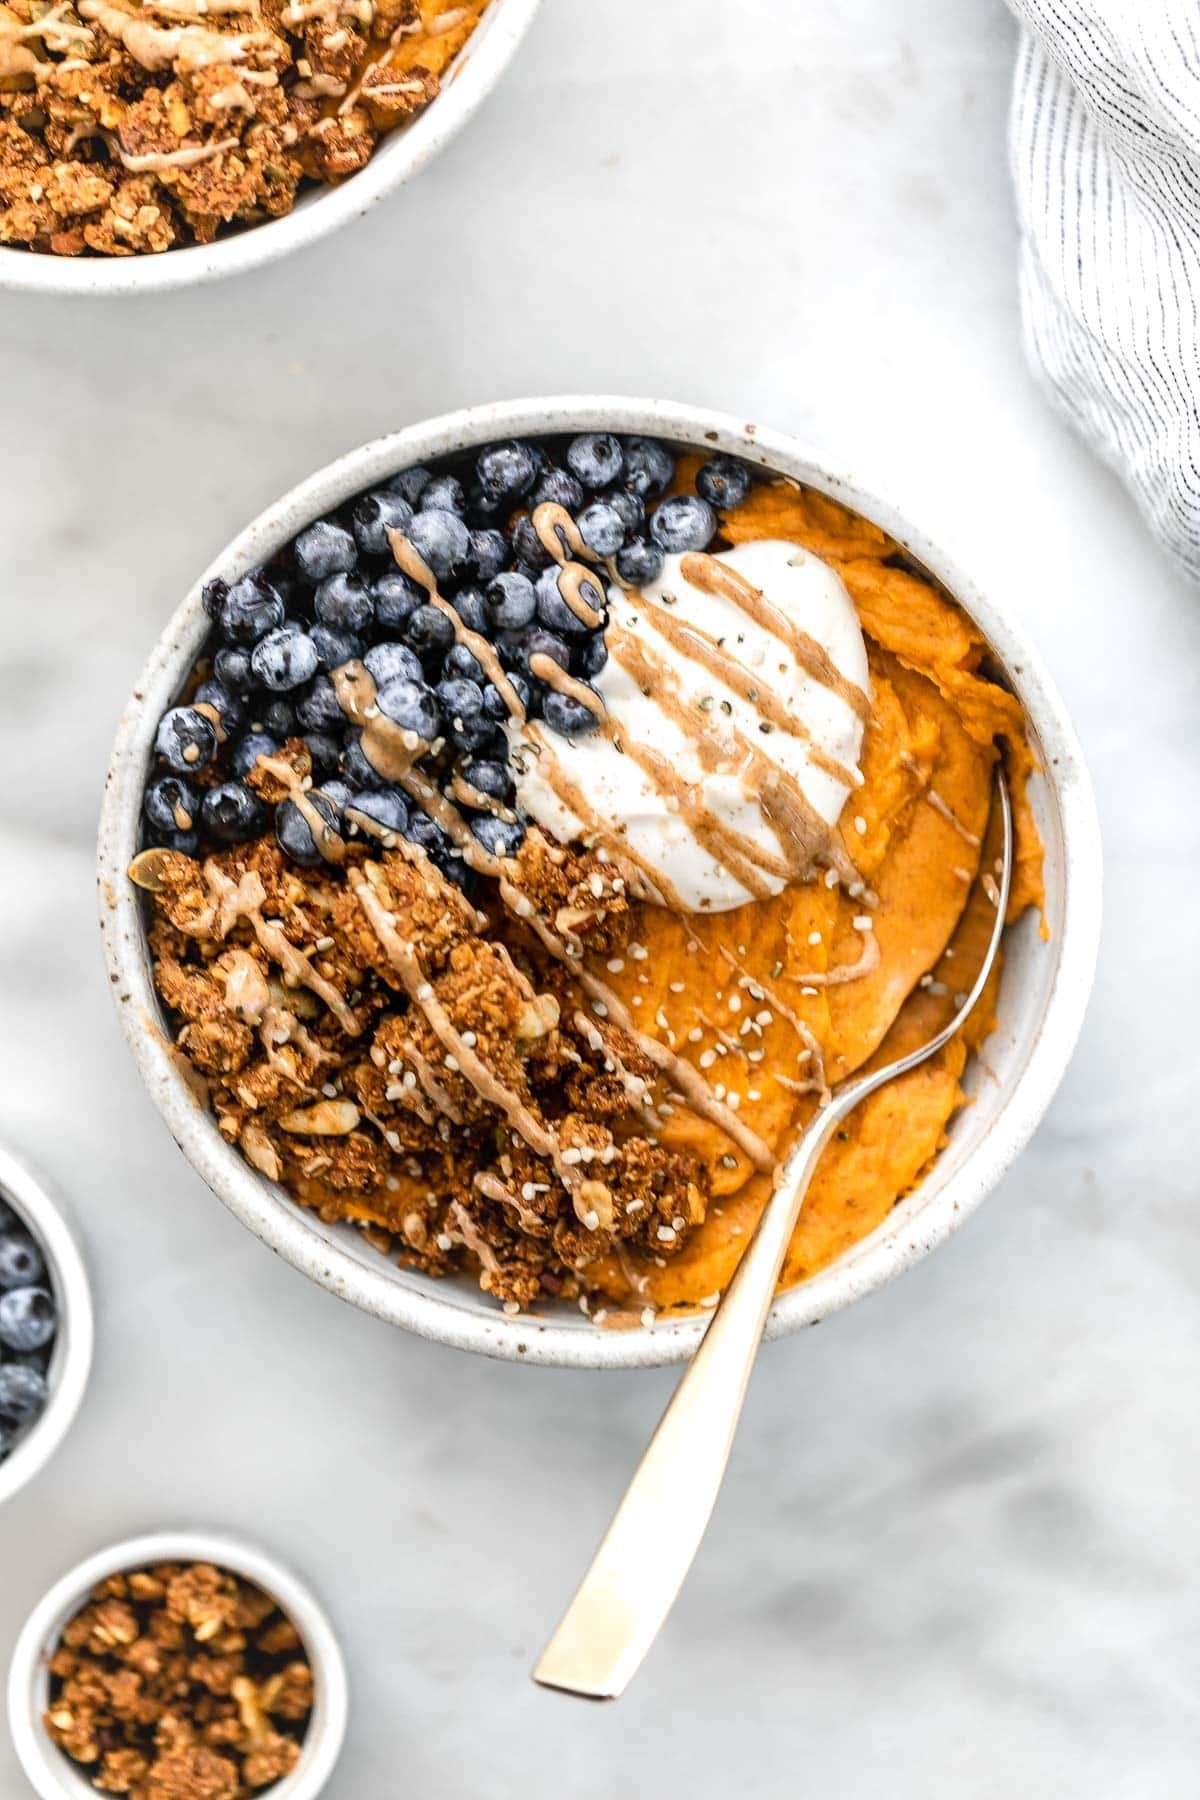 Sweet potato bowl with blueberries and granola clusters.